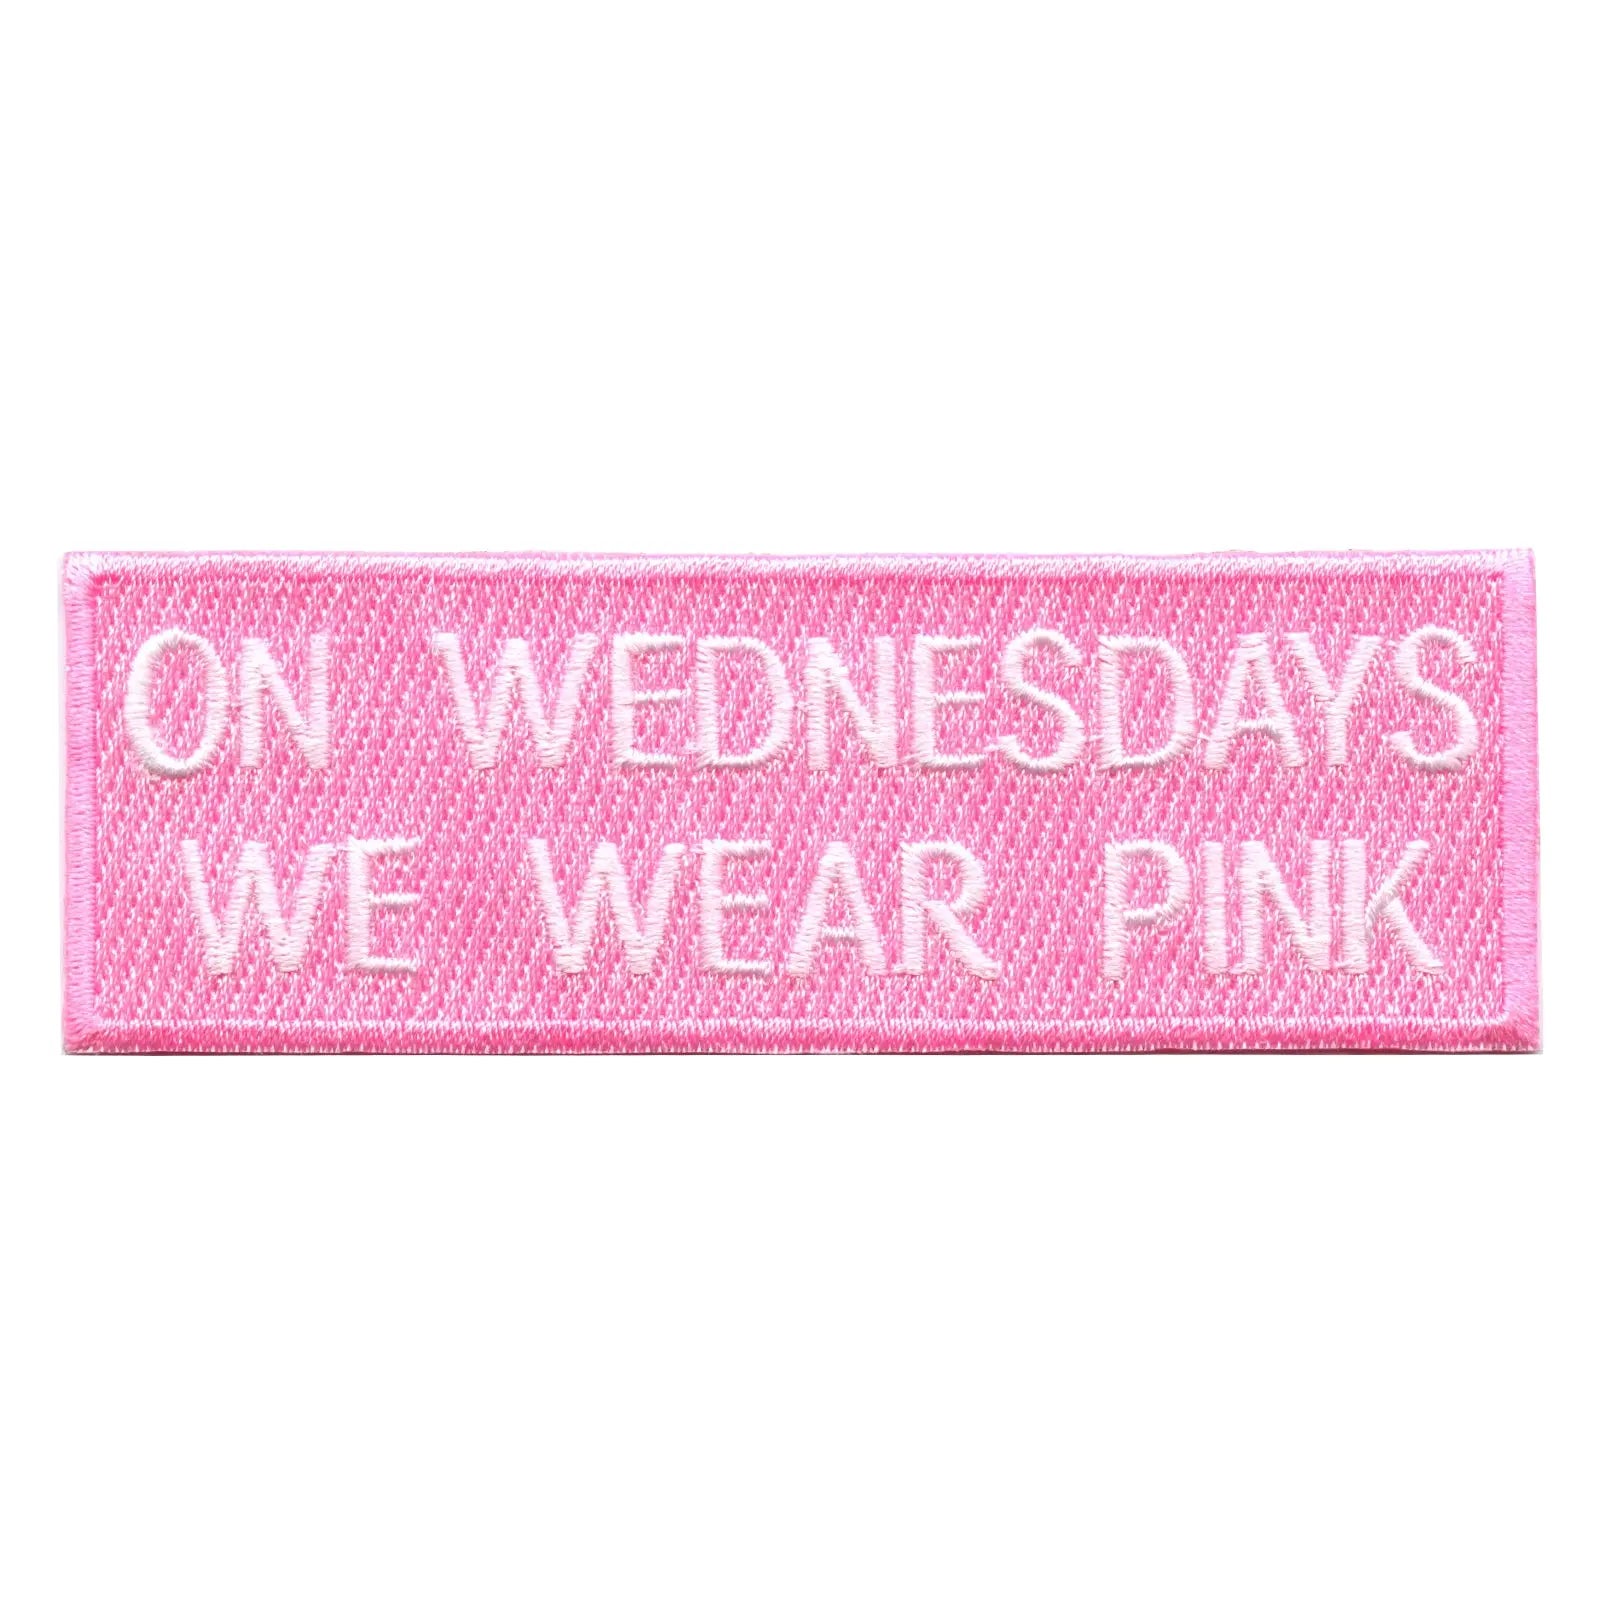 On Wednesdays we clean pink! - The Blog